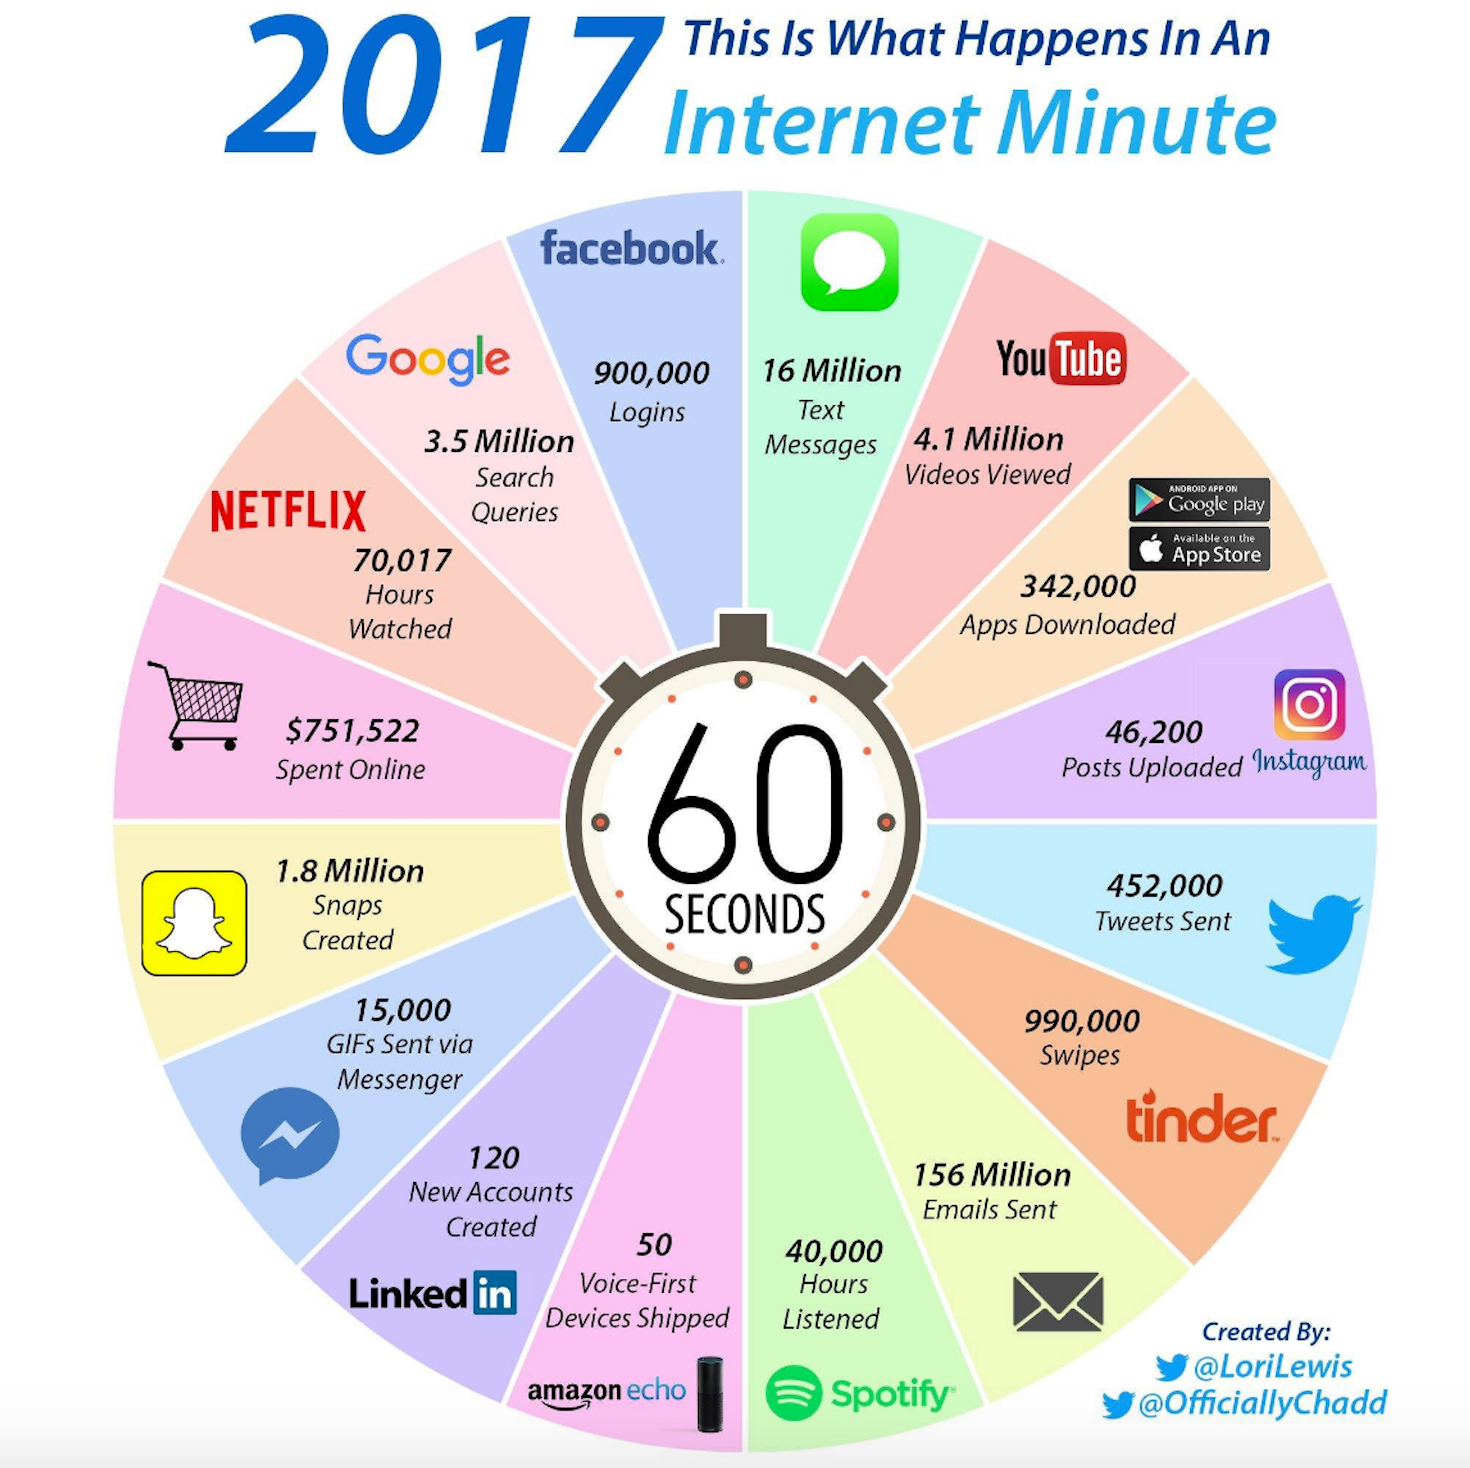 What Happens in an Internet Minute in 2017? [infographic]